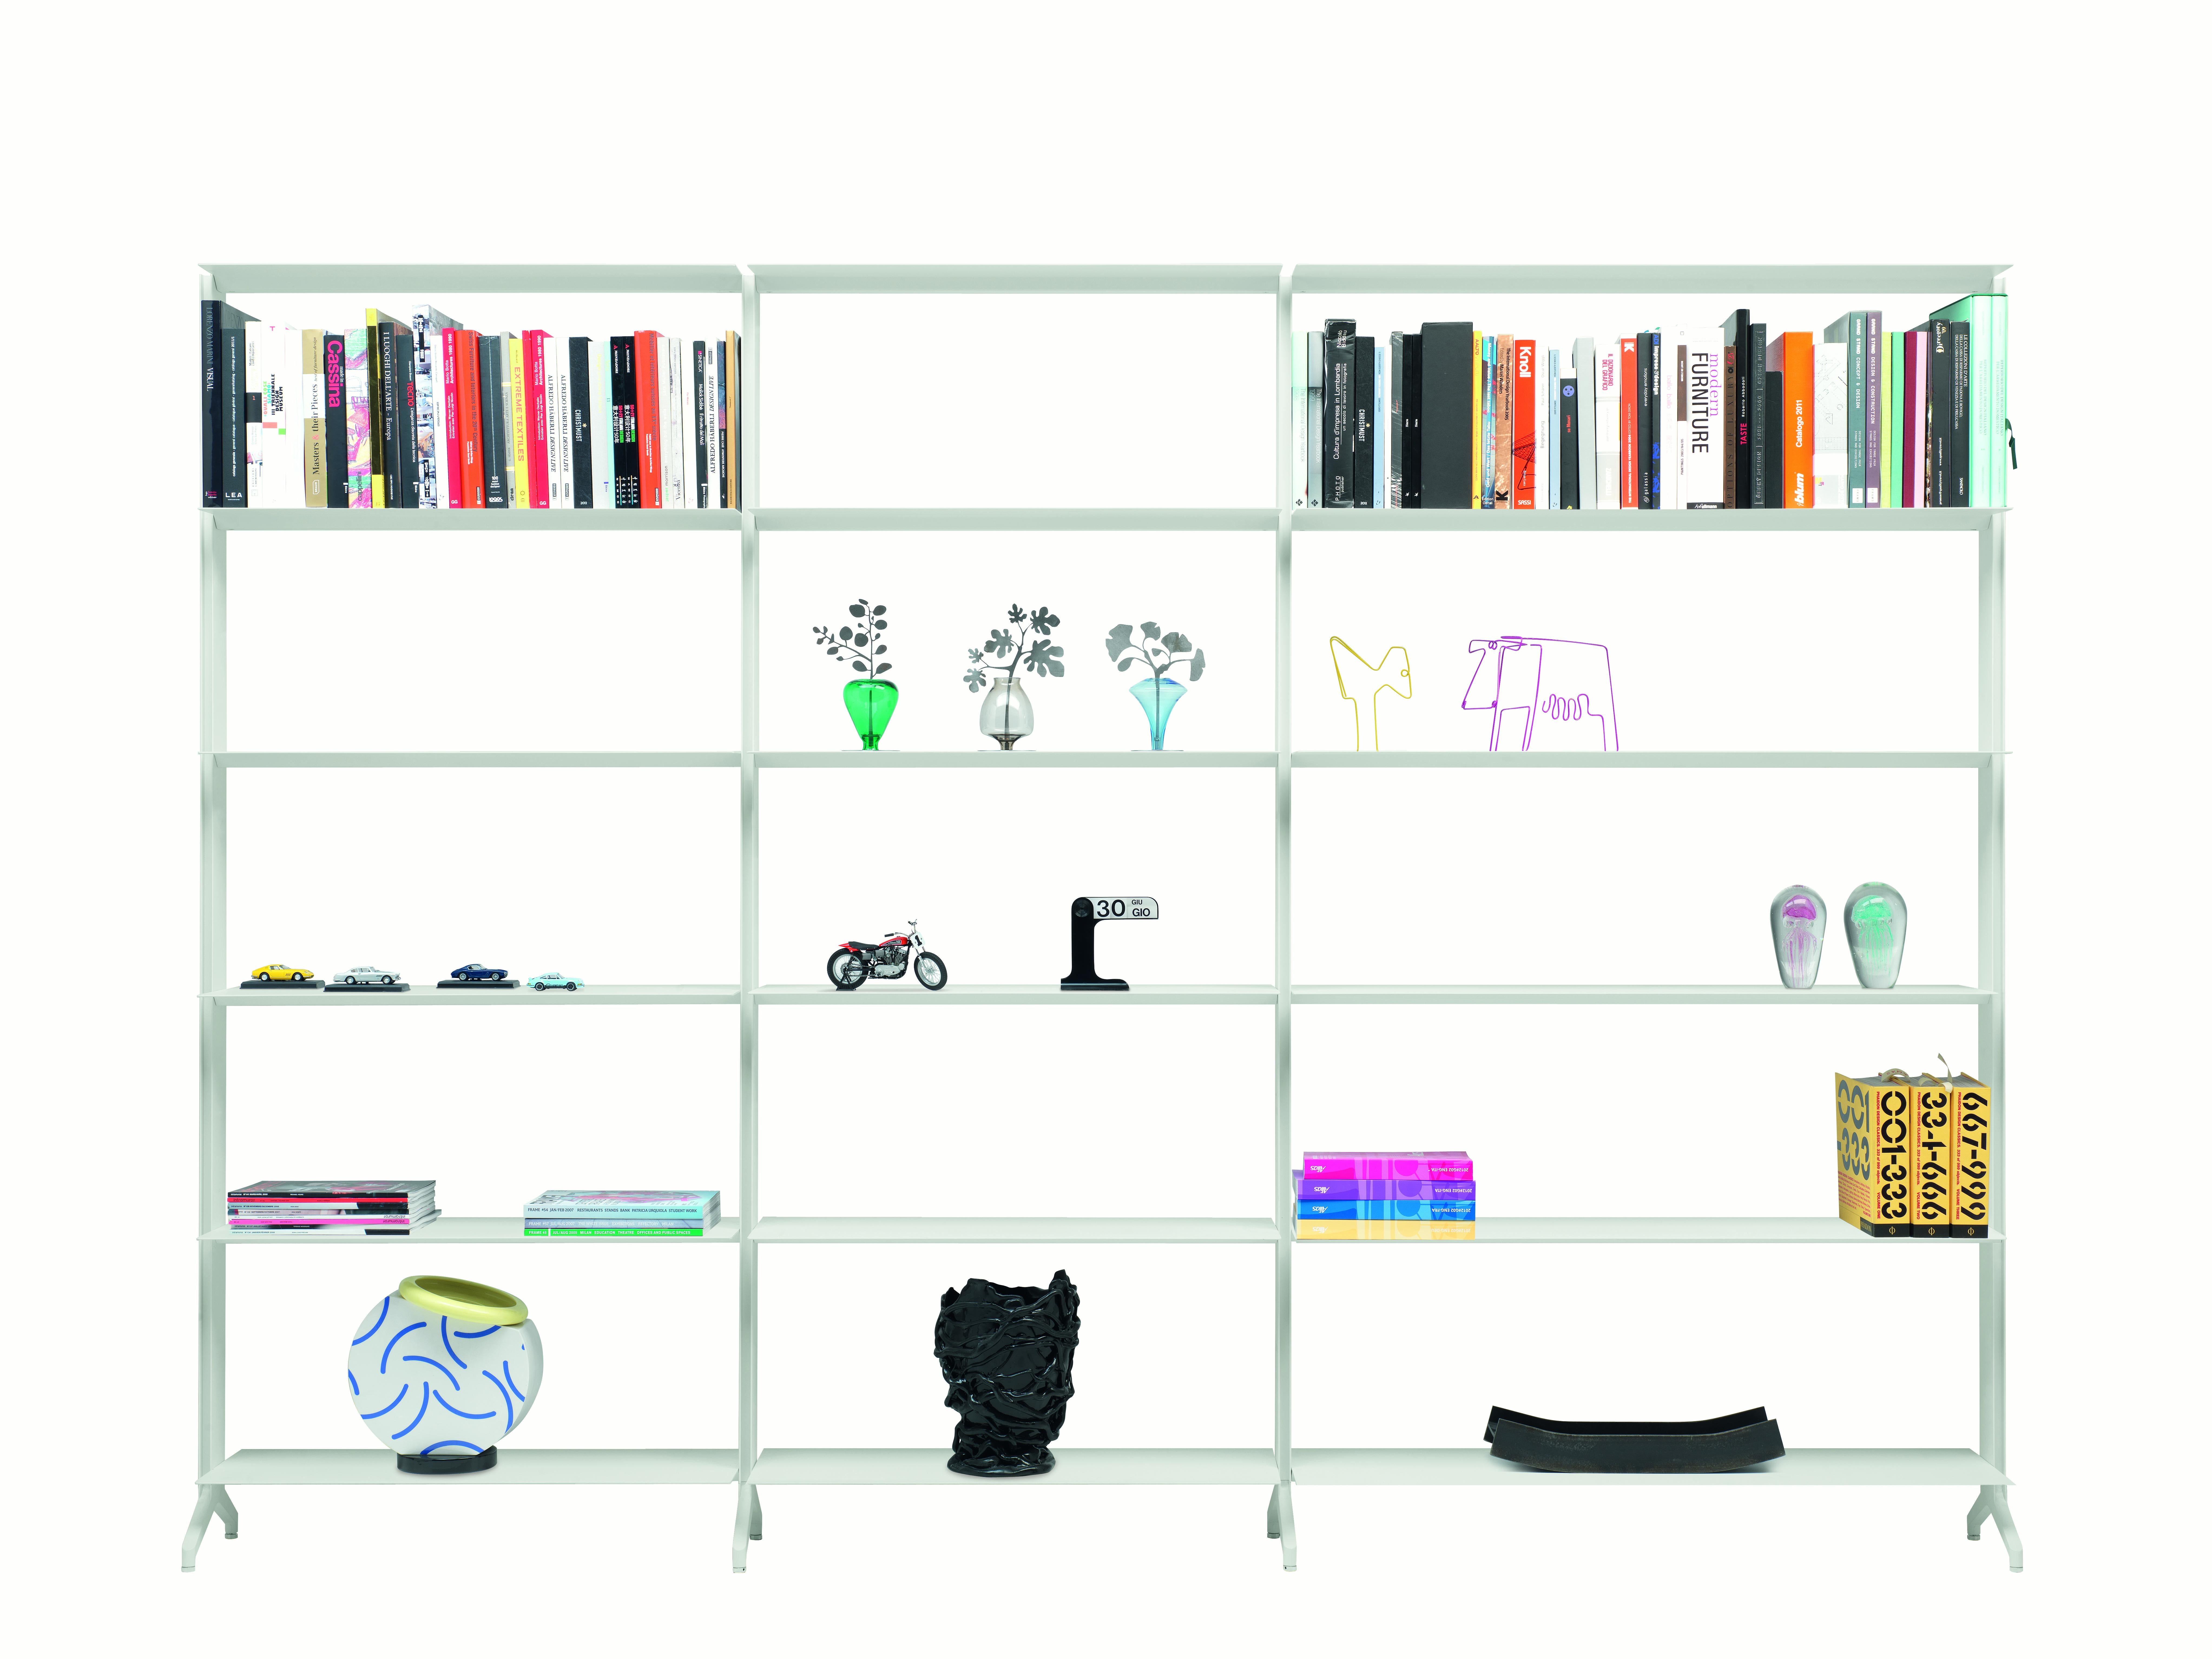 Alias Large J09 Aline Bookshelf in White Lacquered Aluminum Frame In New Condition For Sale In Brooklyn, NY